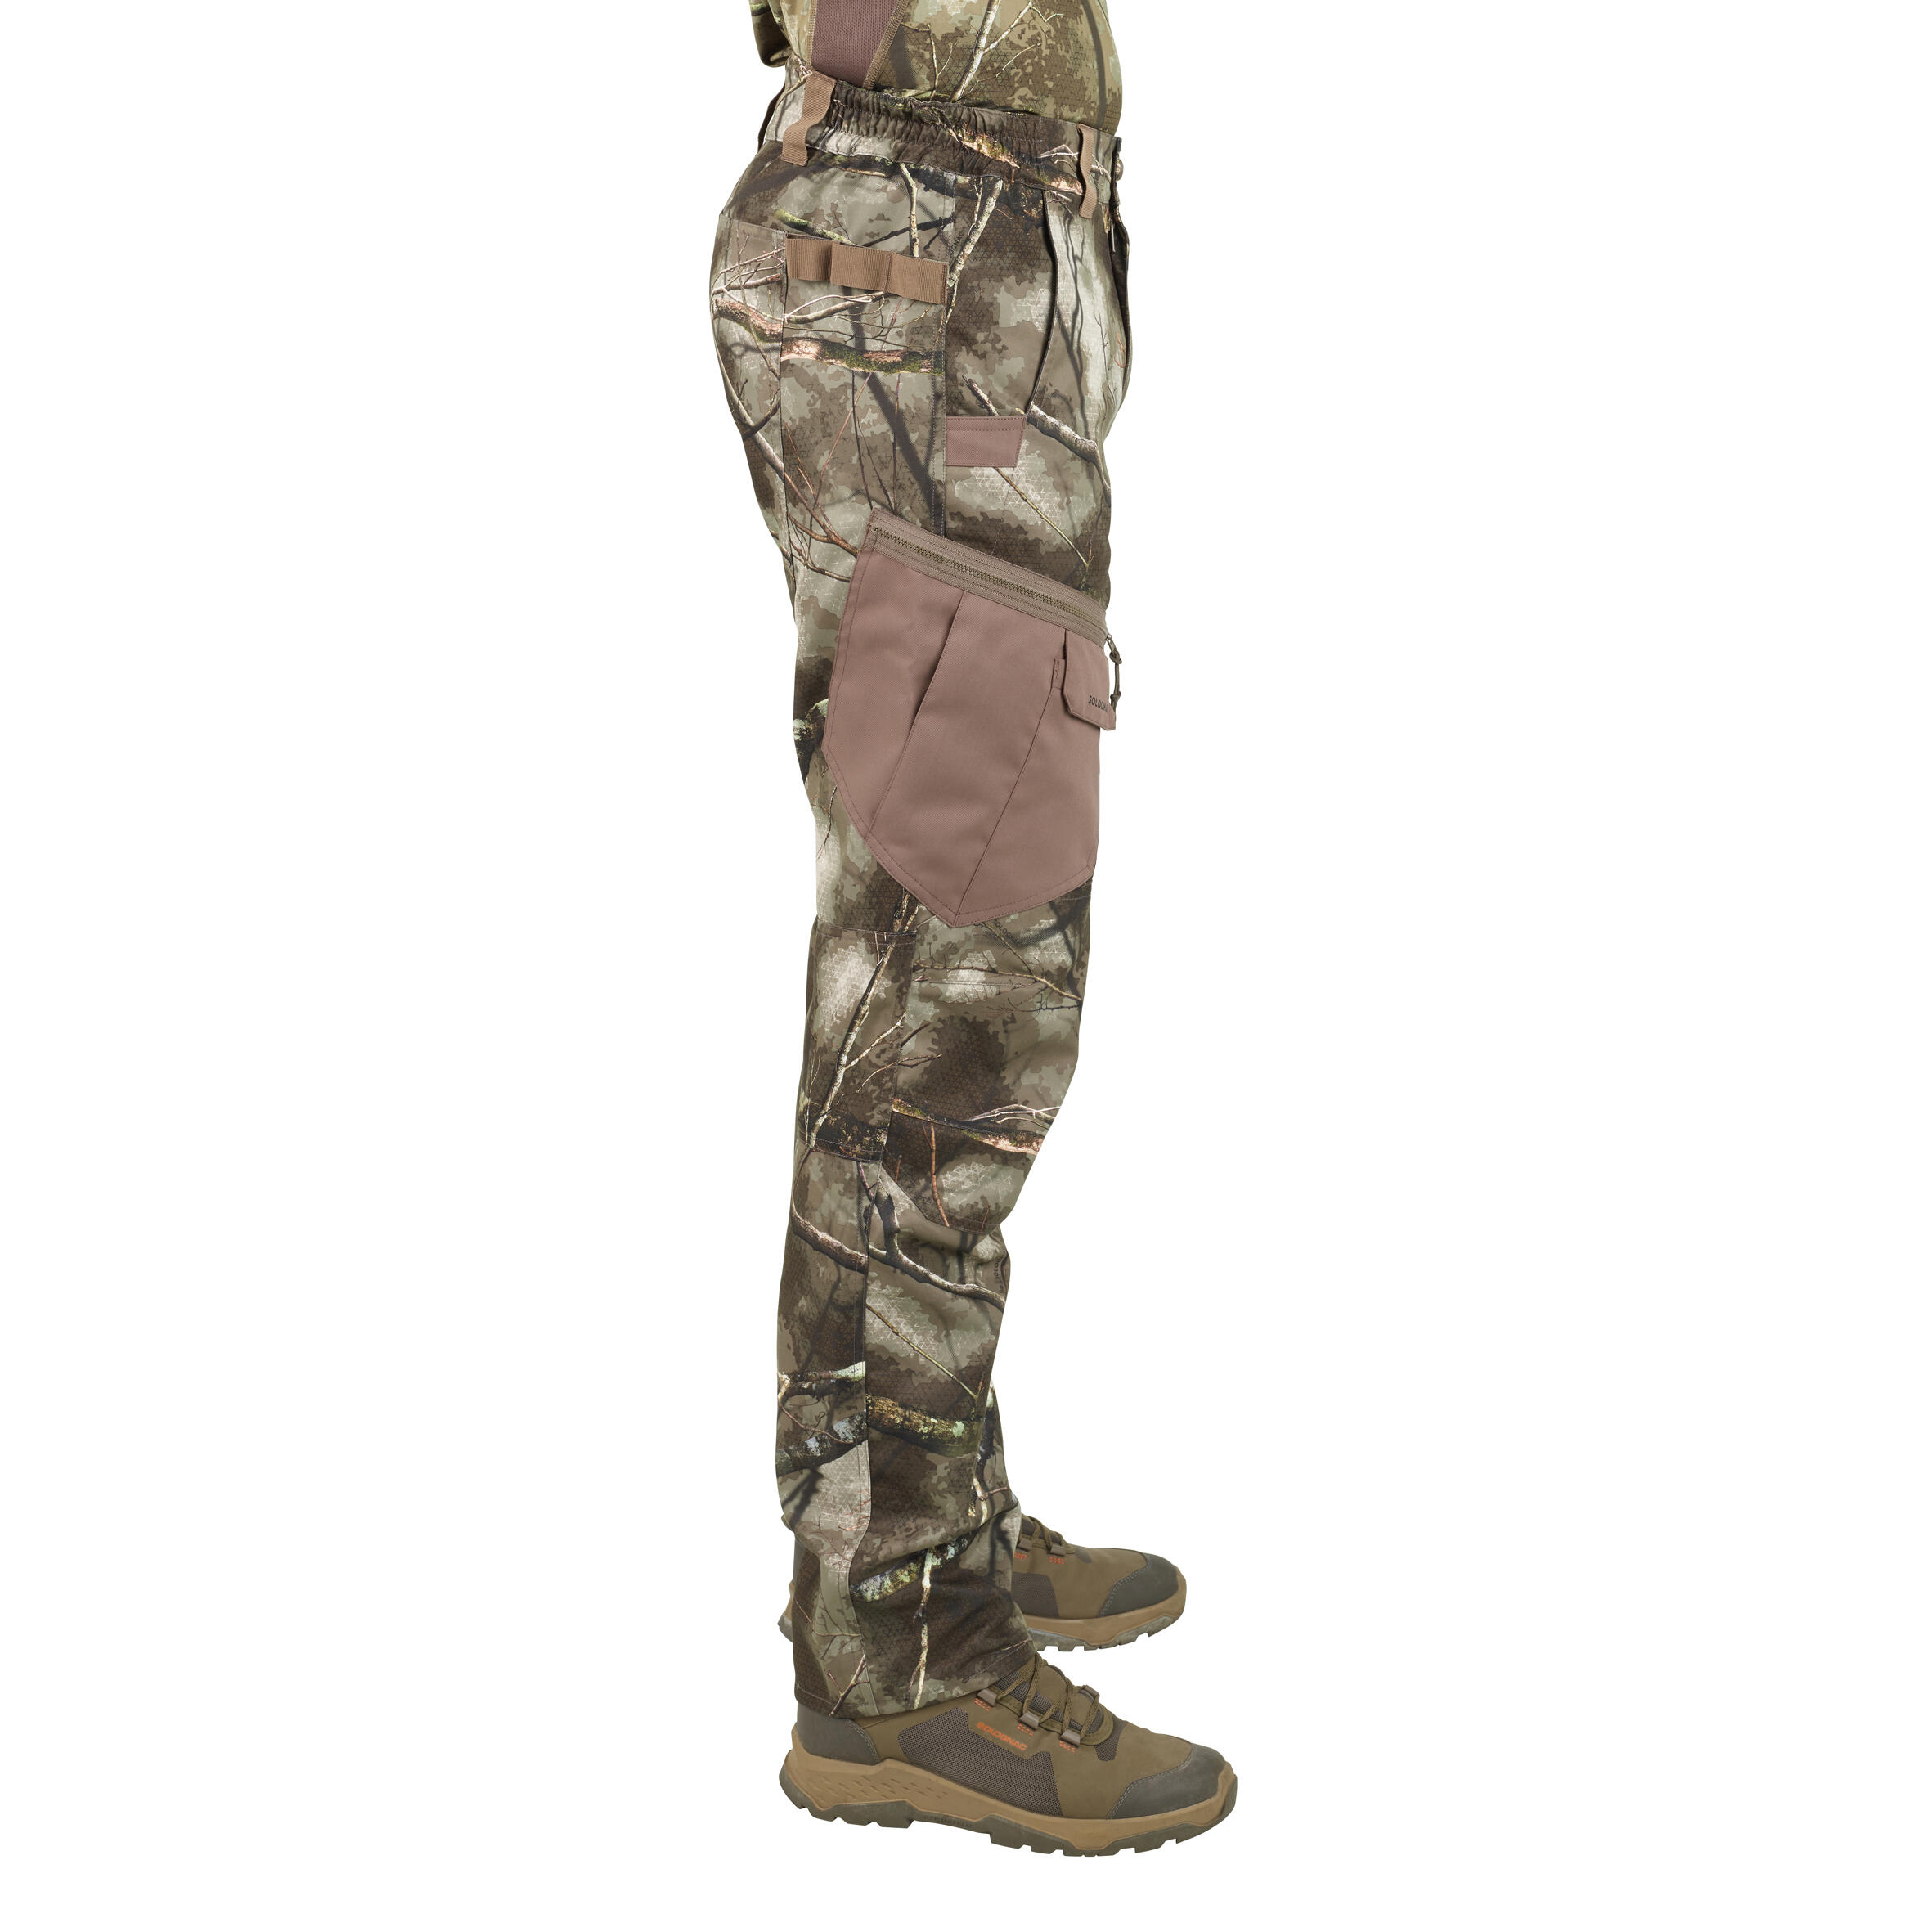 Breathable Hunting Trousers - Treemetic 500 Camouflage - SOLOGNAC